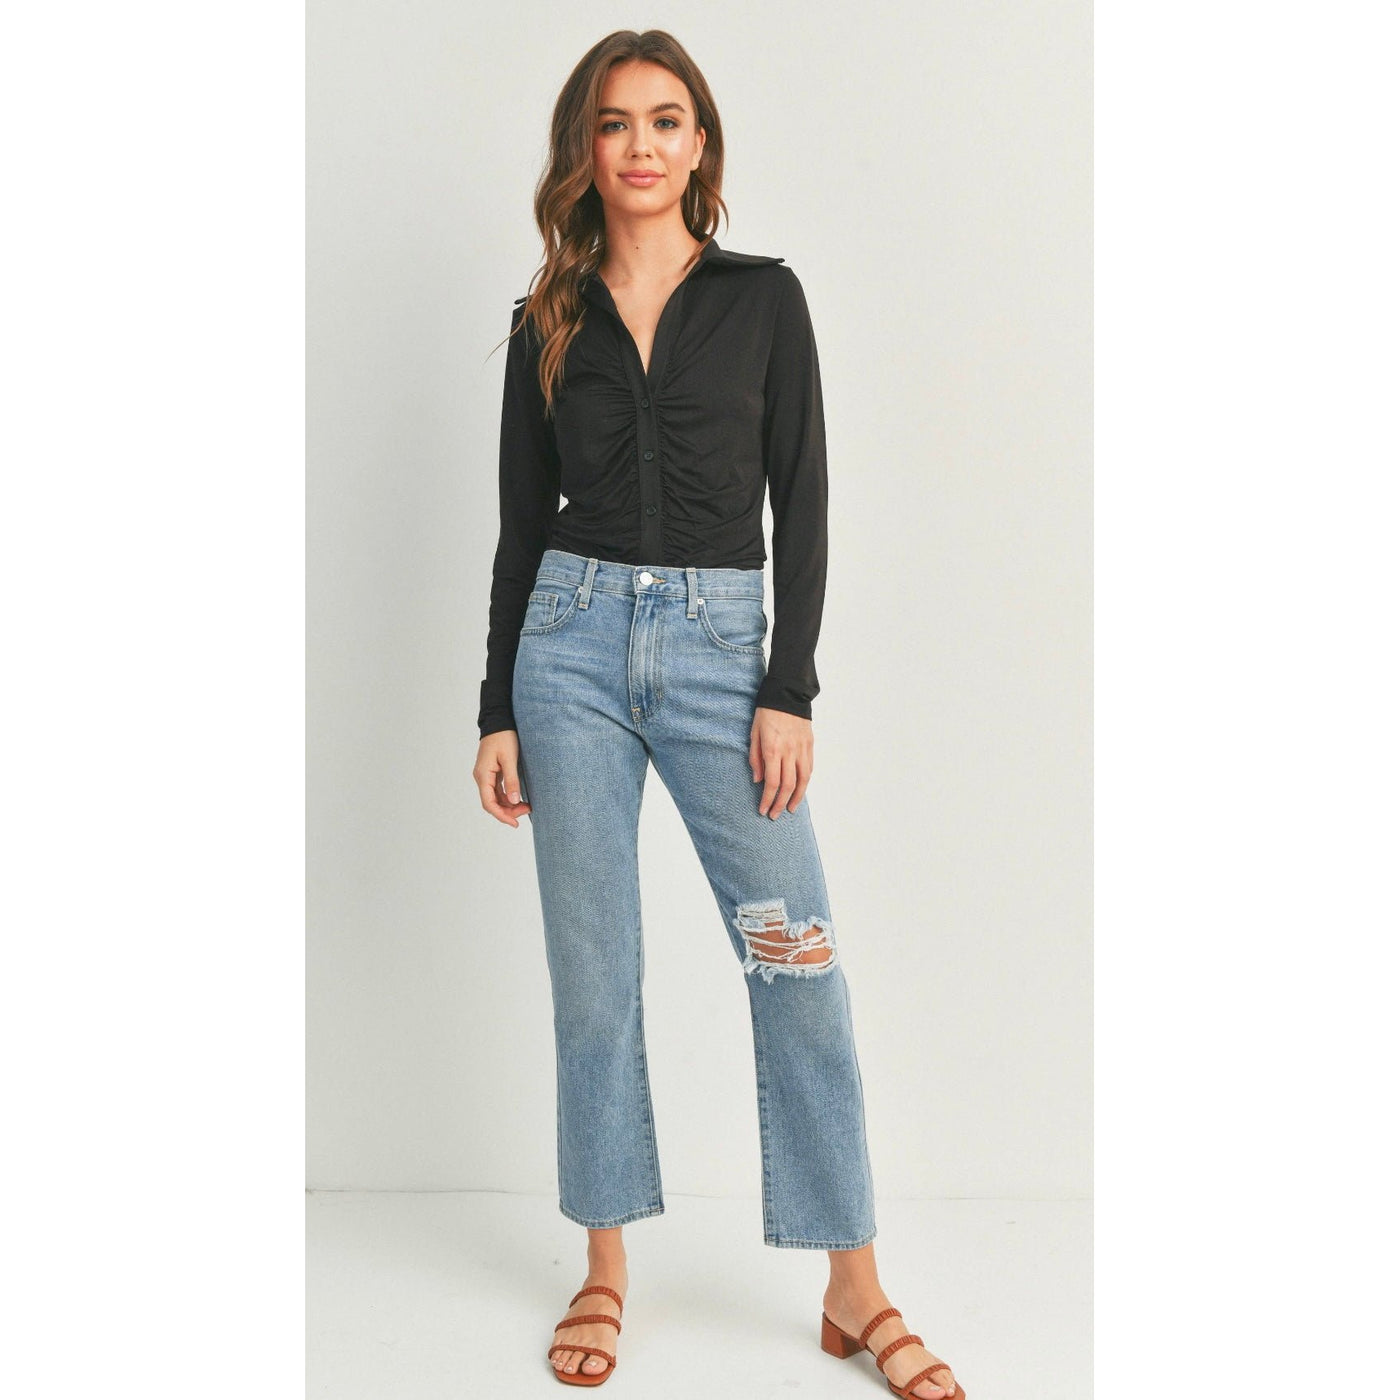 KT High Rise Jeans